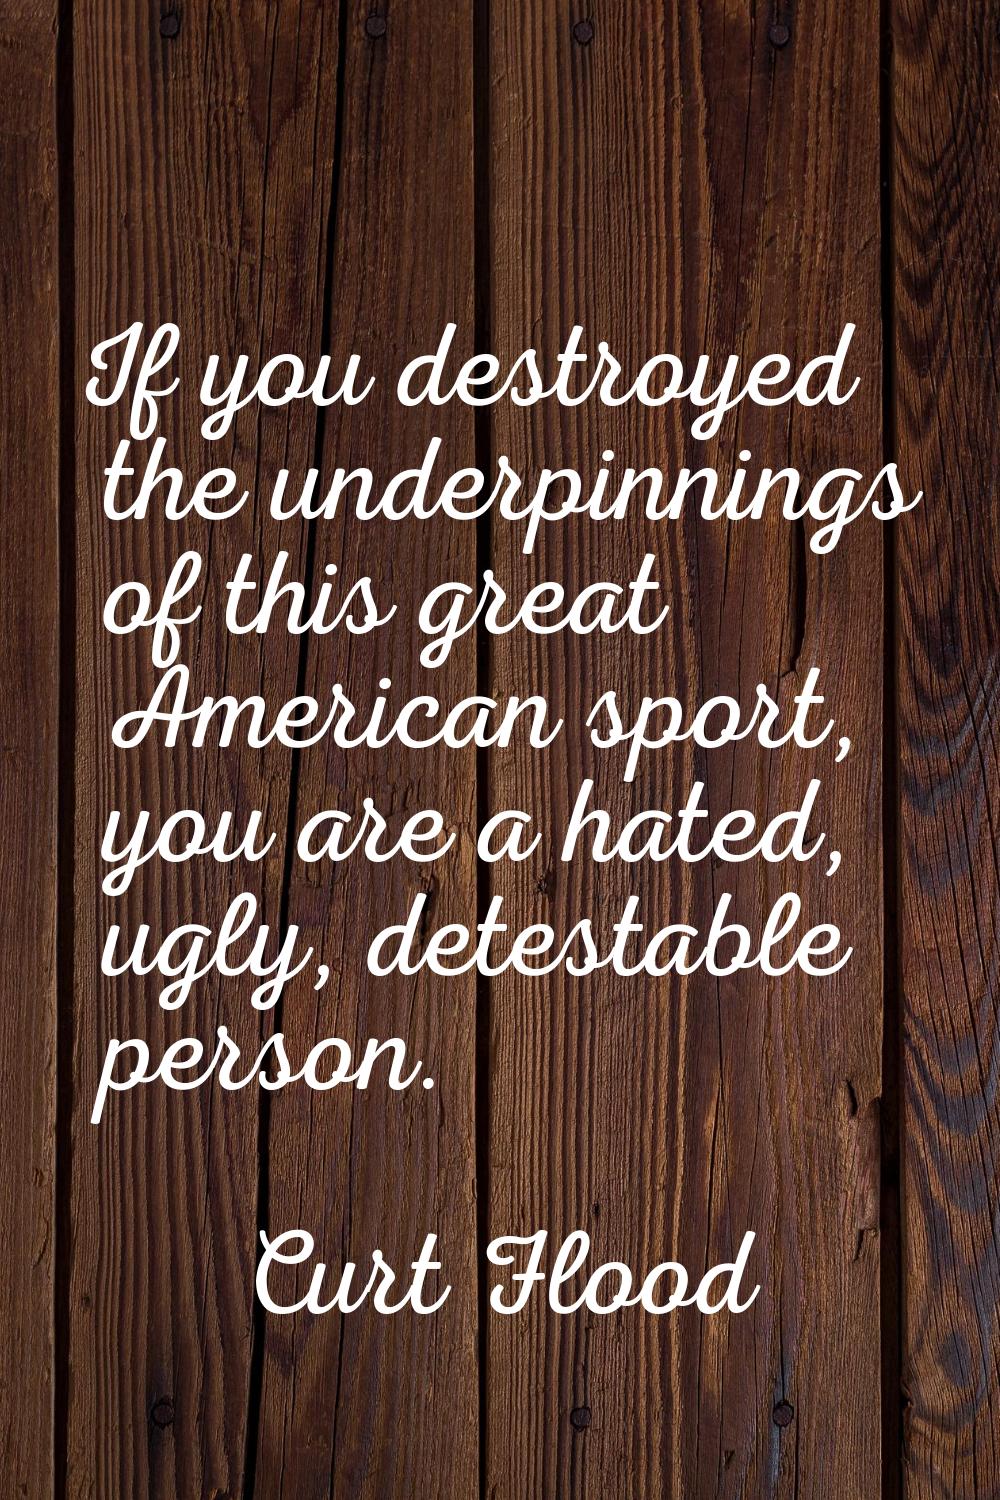 If you destroyed the underpinnings of this great American sport, you are a hated, ugly, detestable 